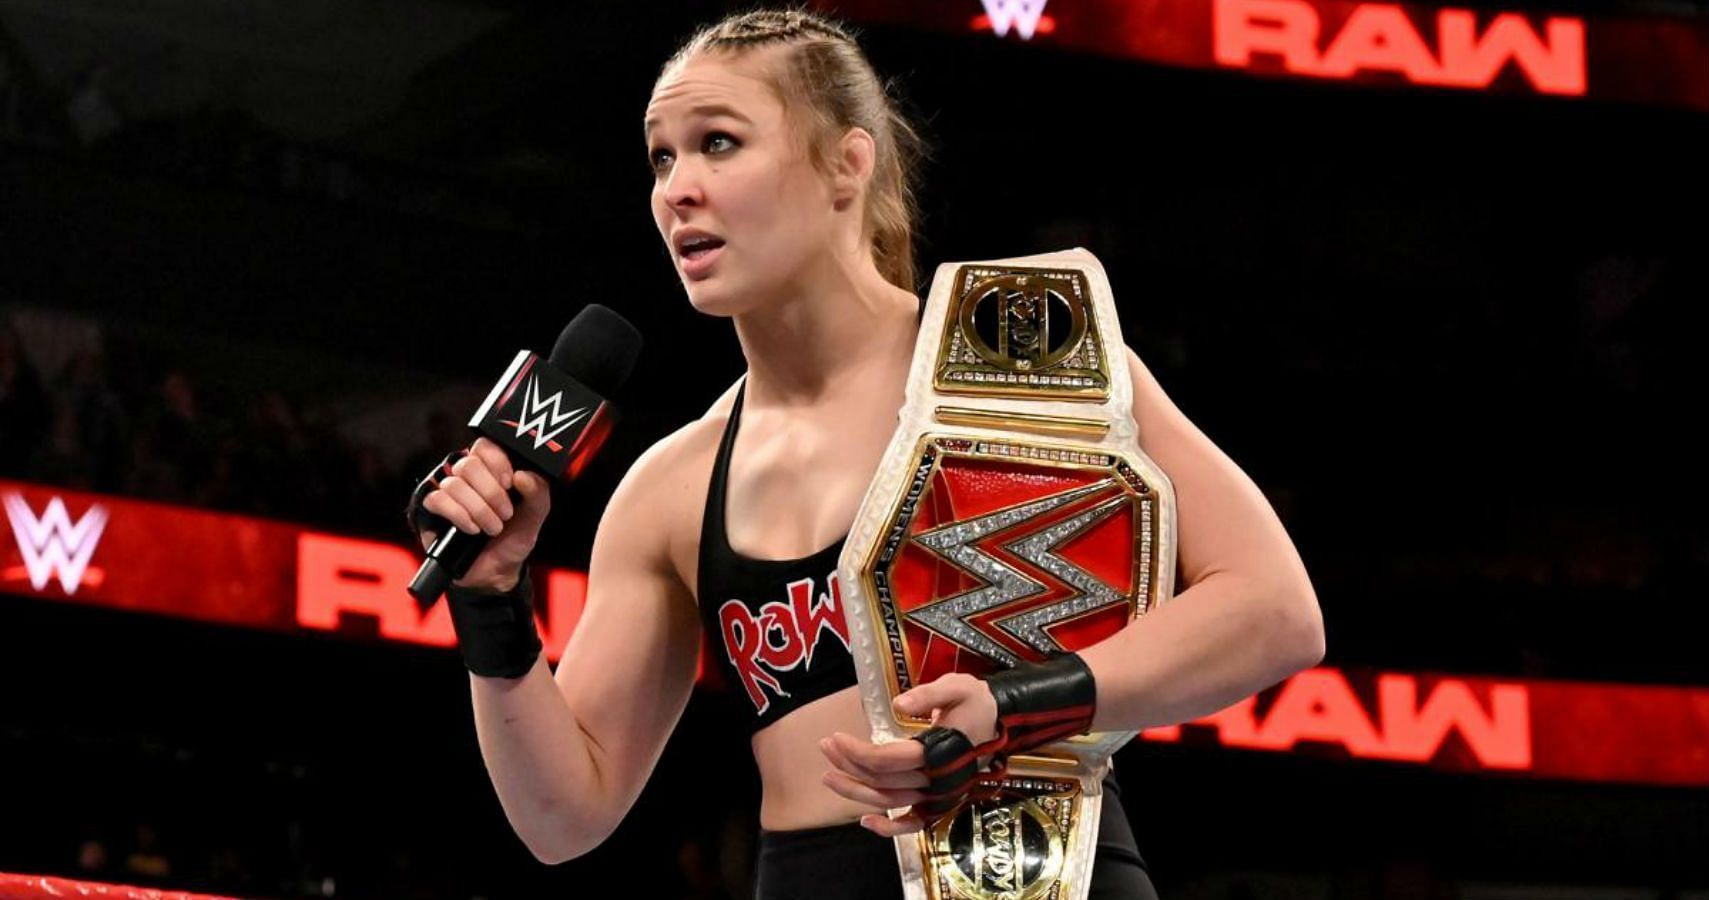 Ronda Rousey will face Charlotte Flair at WrestleMania 38